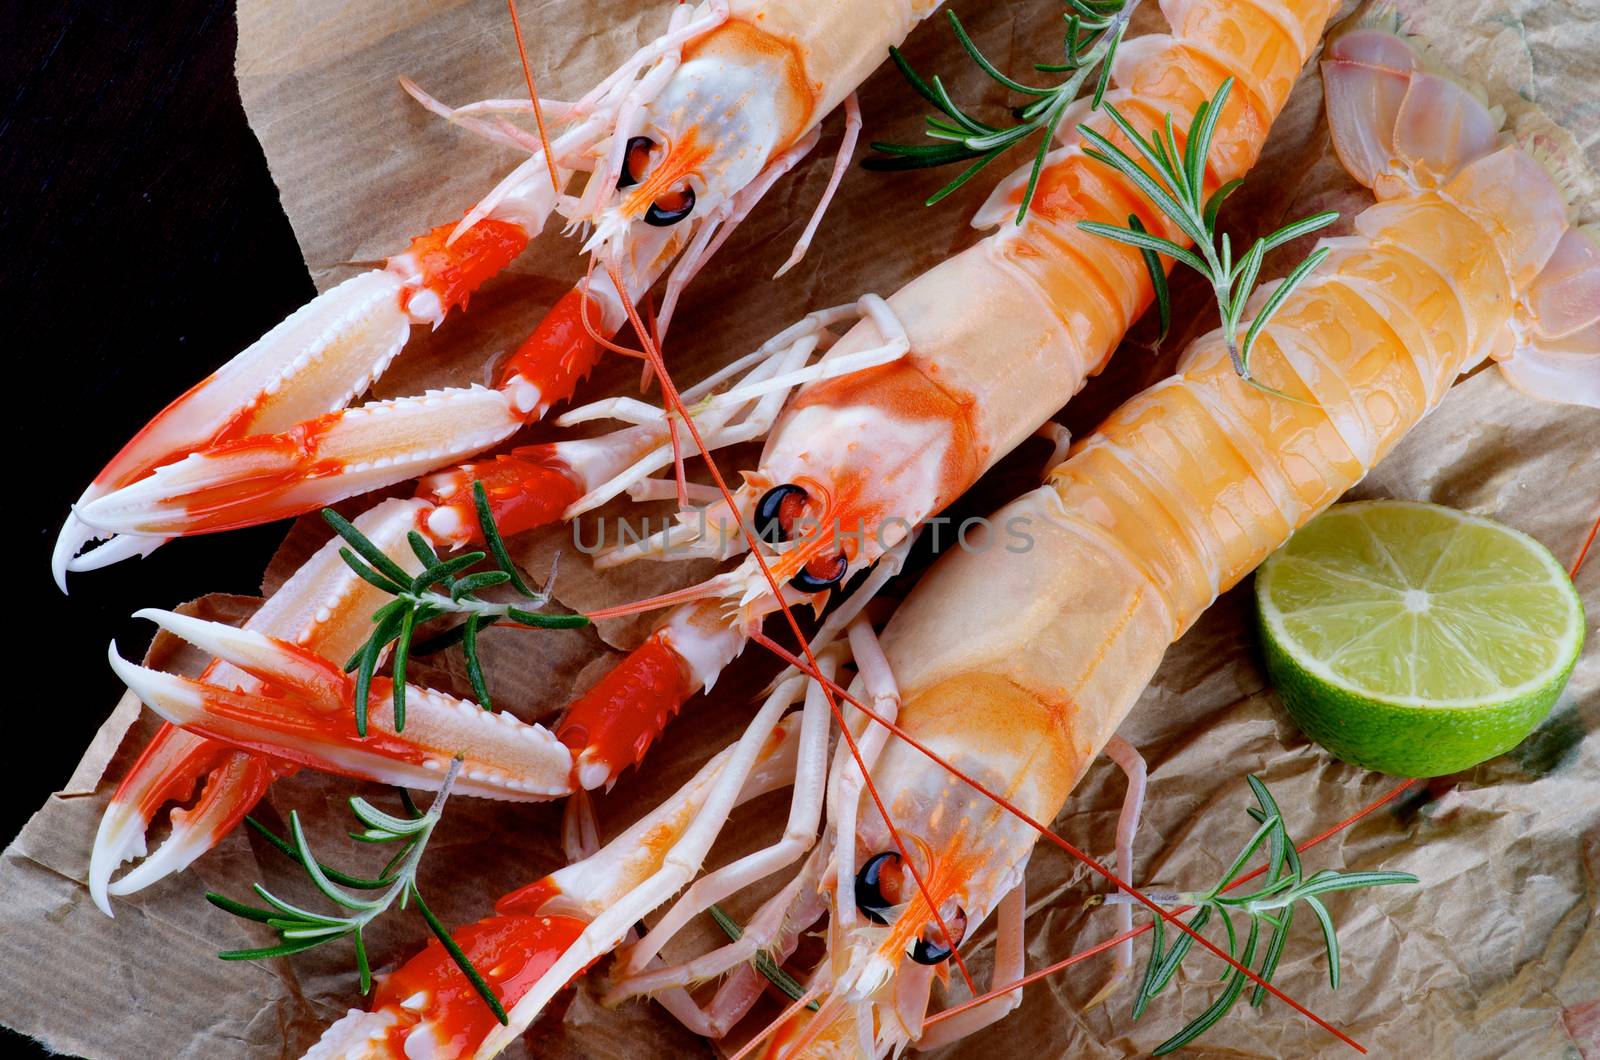 Three Delicious Raw Langoustines with Lime and Rosemary Cross Section on Parchment Paper